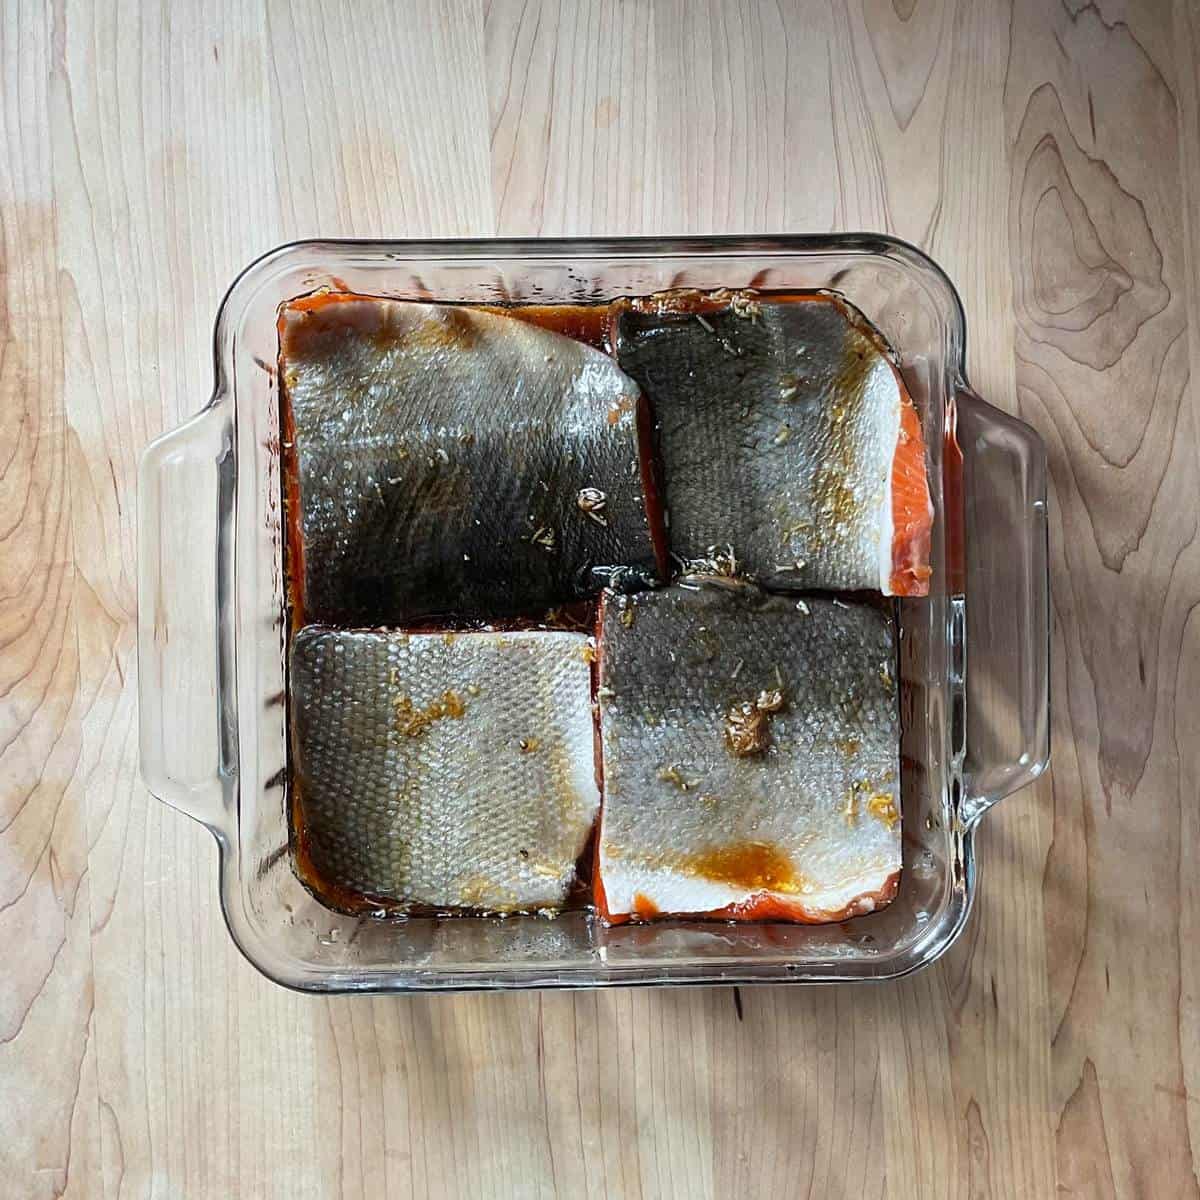 Salmon fillets marinating in a glass baking dish.